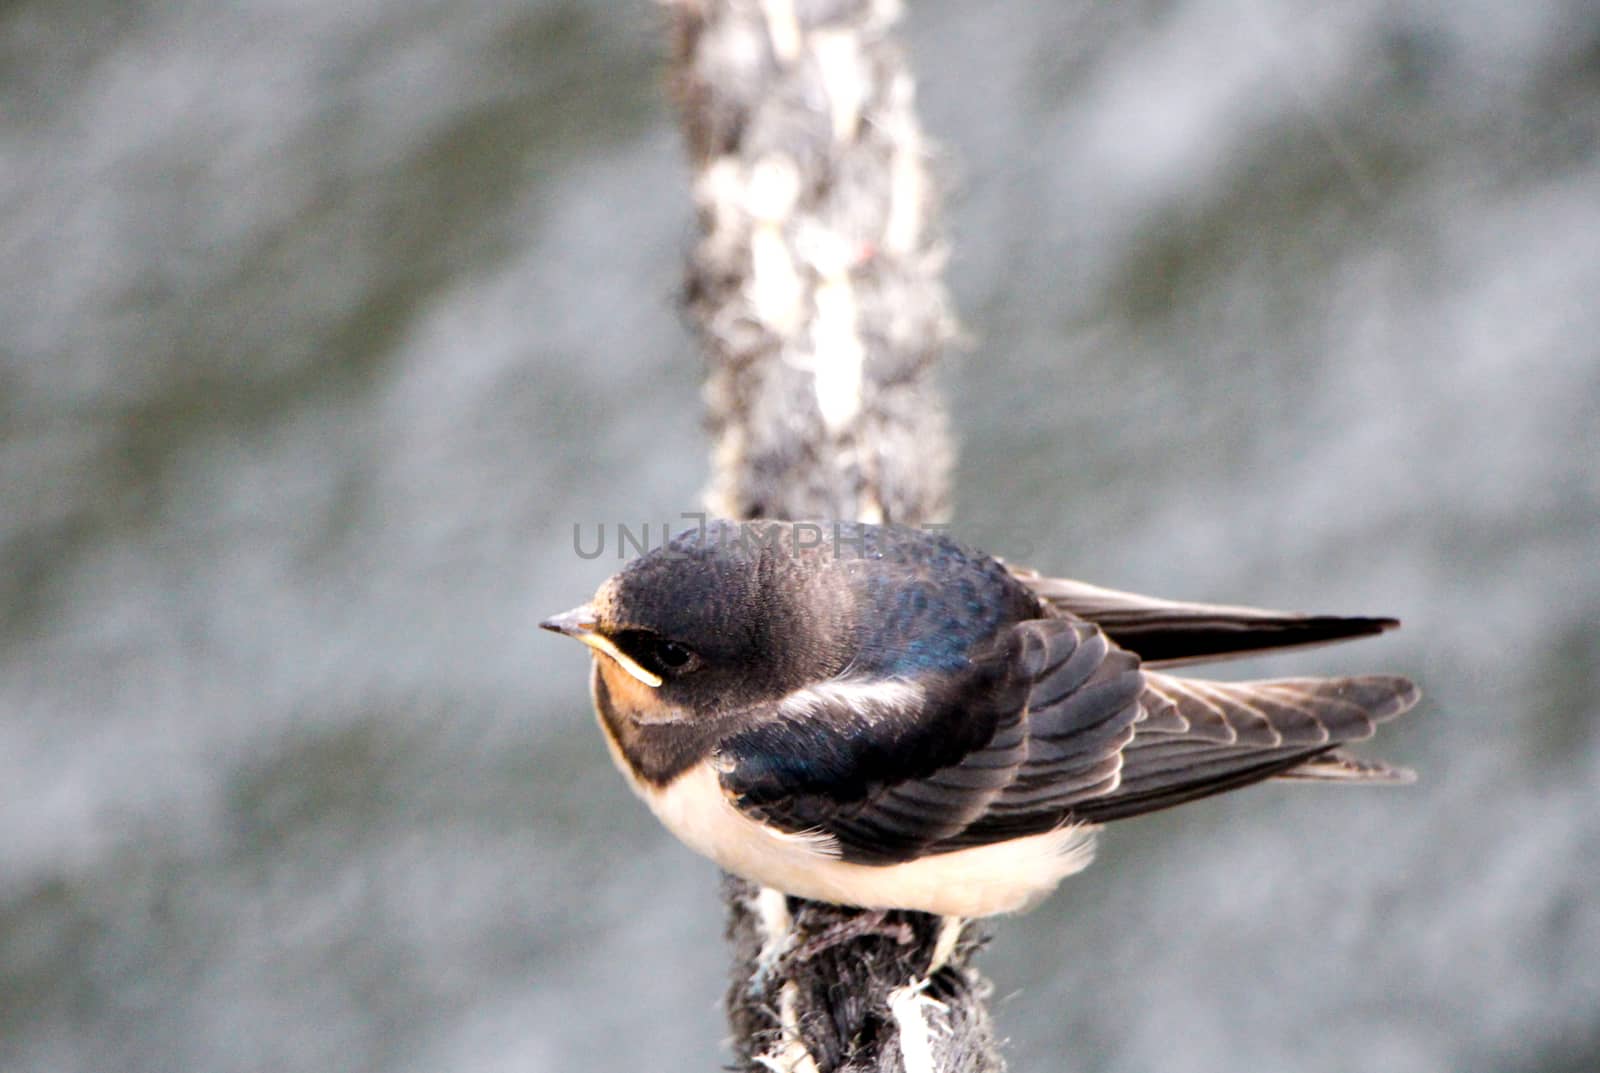 Swallow Sitting on Mooring by Mads_Hjorth_Jakobsen